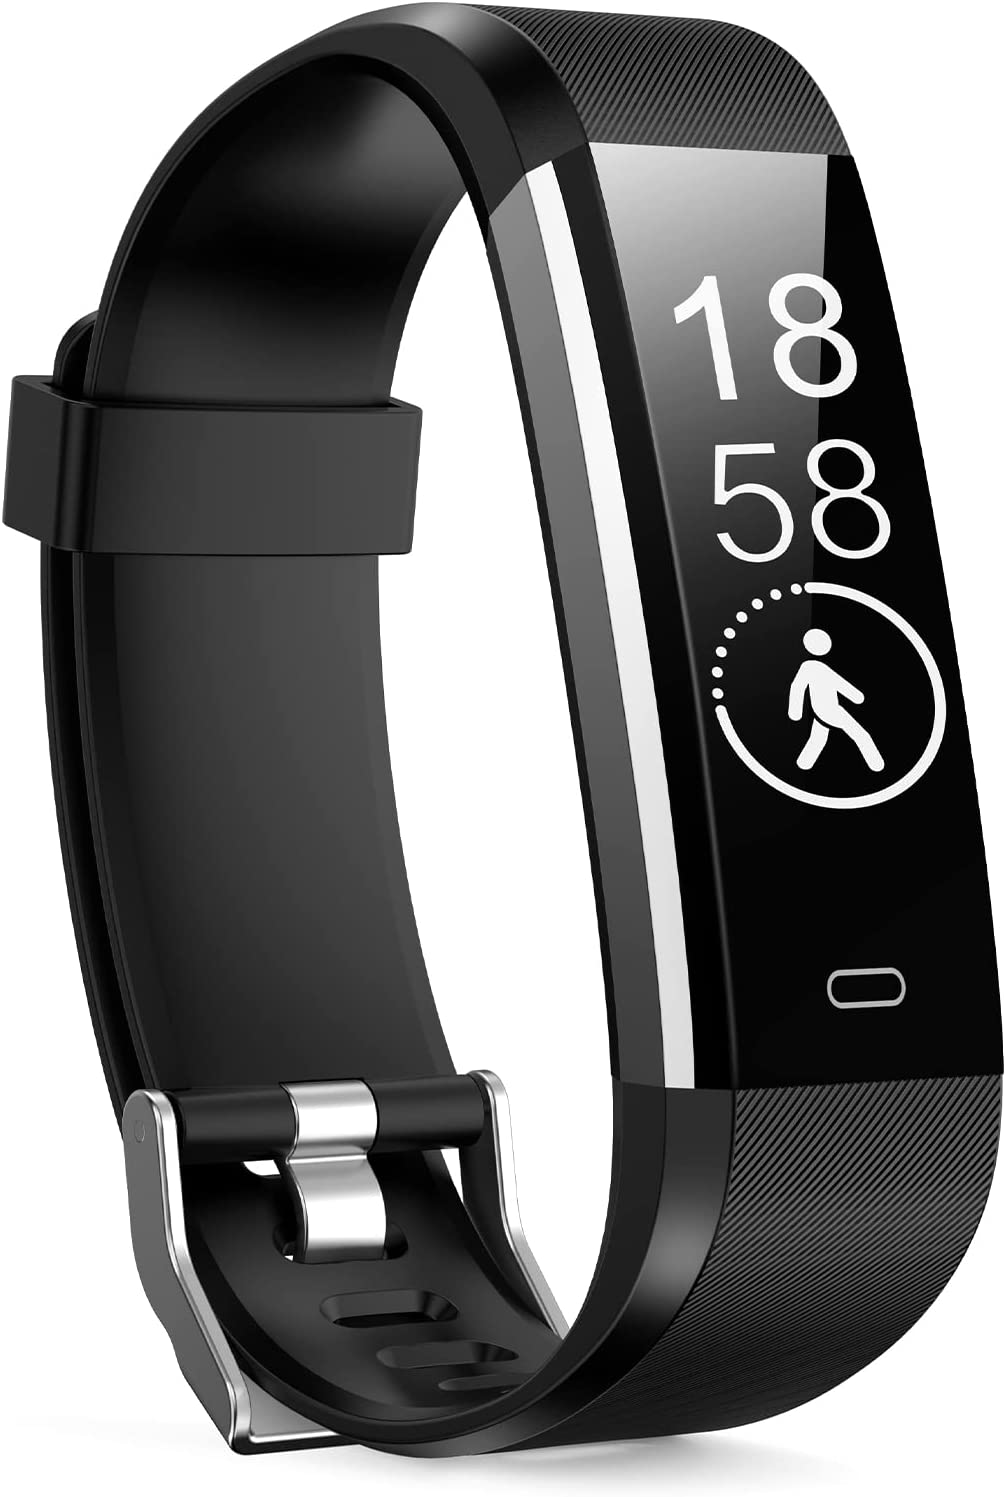 Fitness Tracker HR, Activity Tracker Watch with Heart Rate Monitor,  Waterproof Smart Fitness Band with Step Counter, Calorie Counter, Pedometer  Watch for Kids Women and Men 